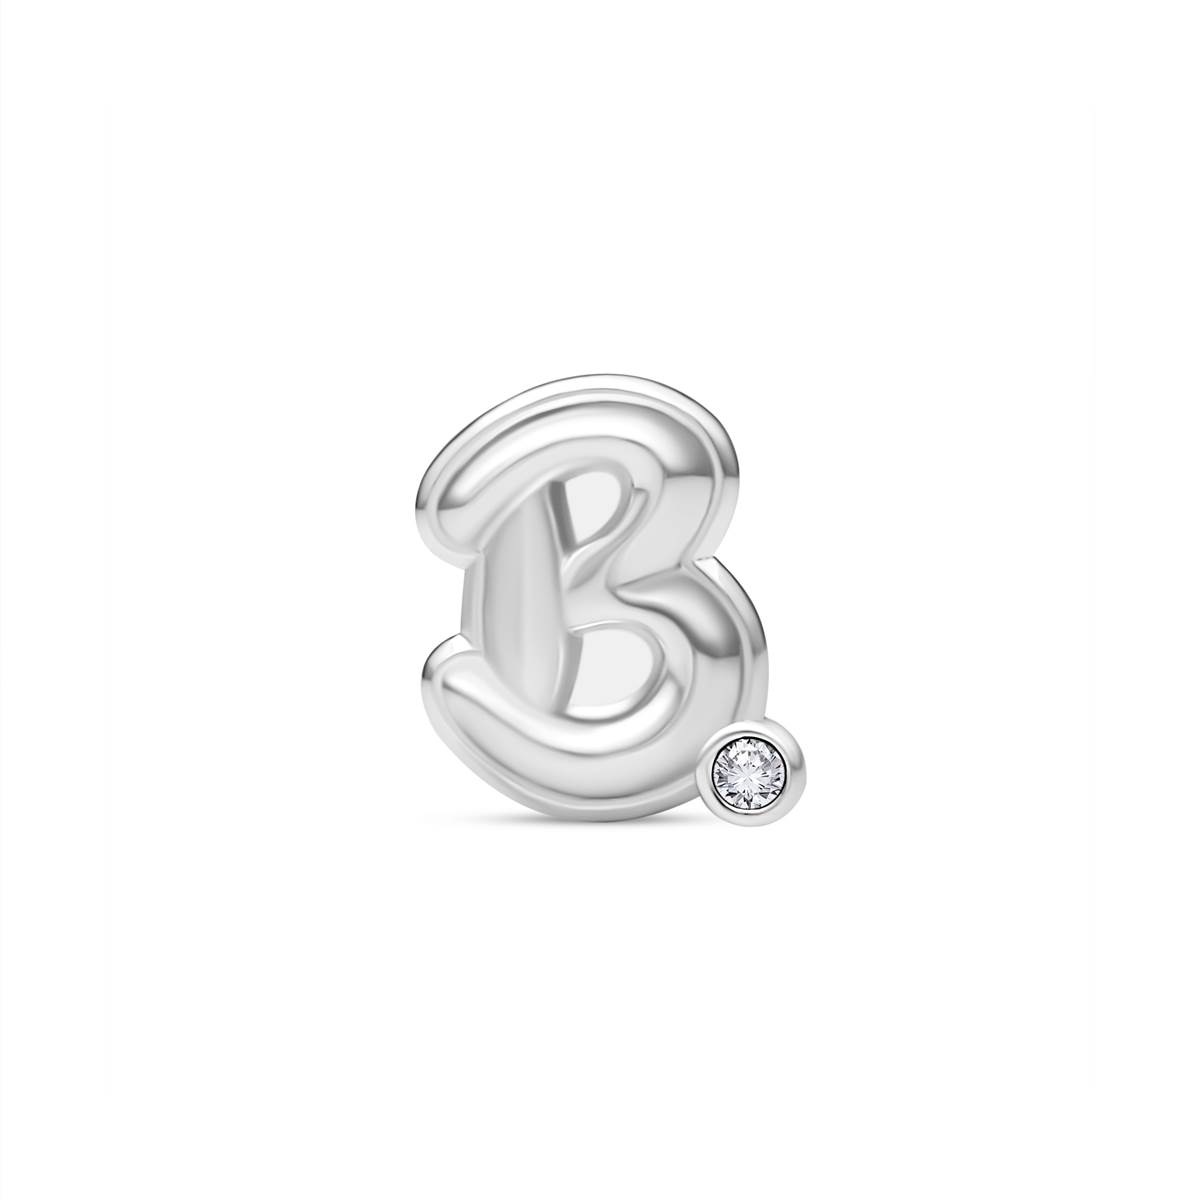 B for Balance: Harmonize your life, find peace